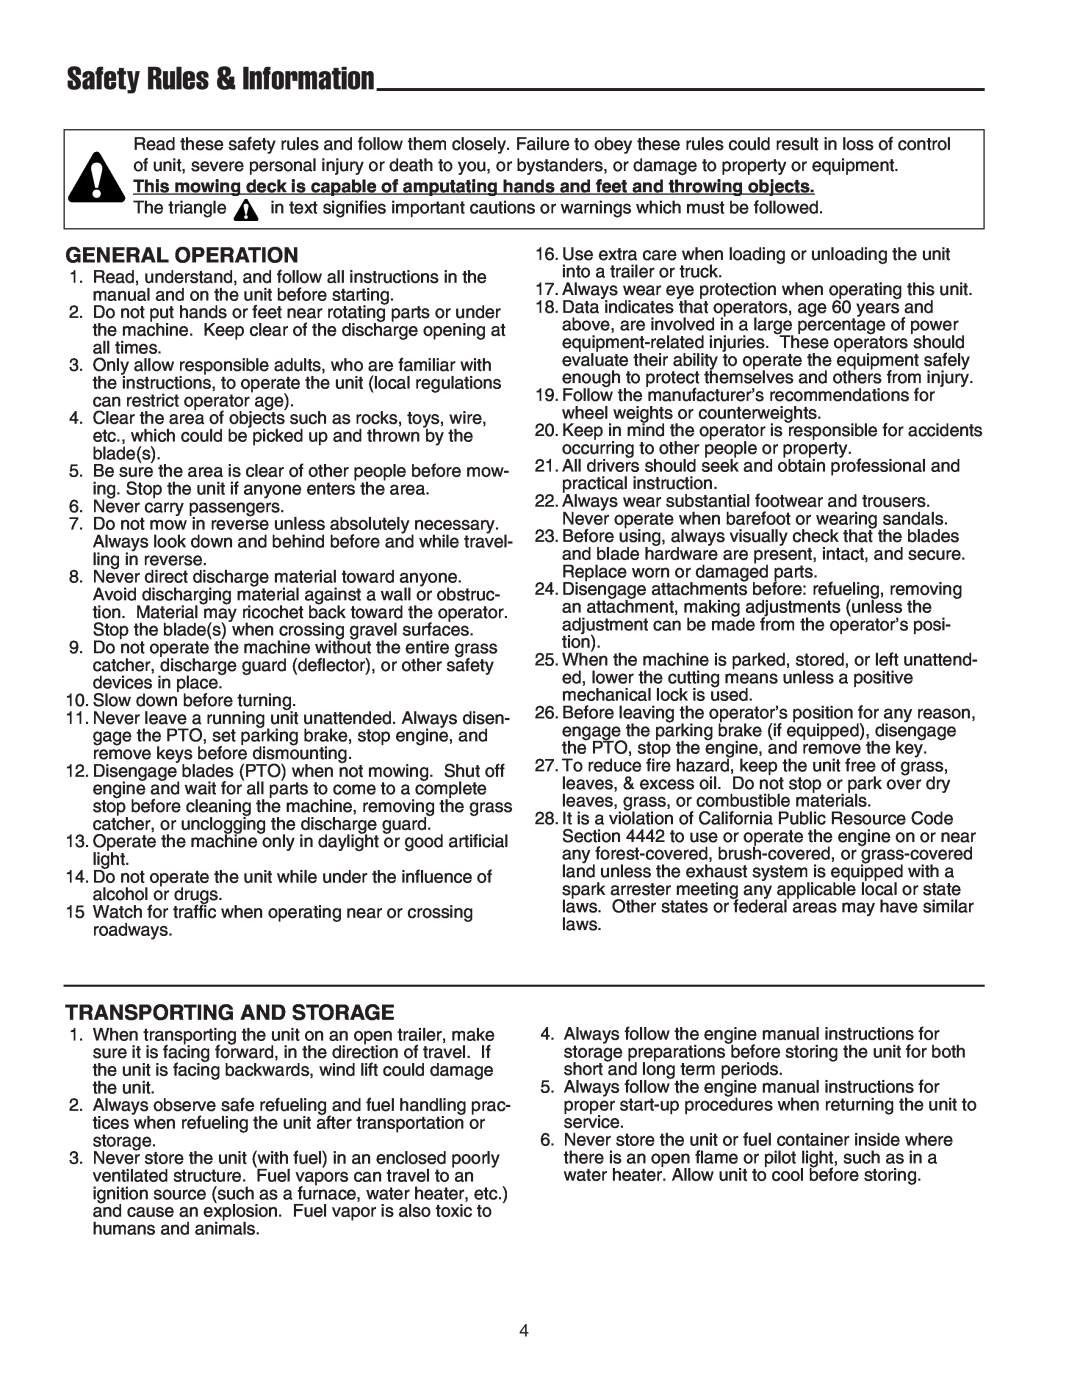 Snapper 400 Series manual Safety Rules & Information, General Operation, Transporting And Storage 